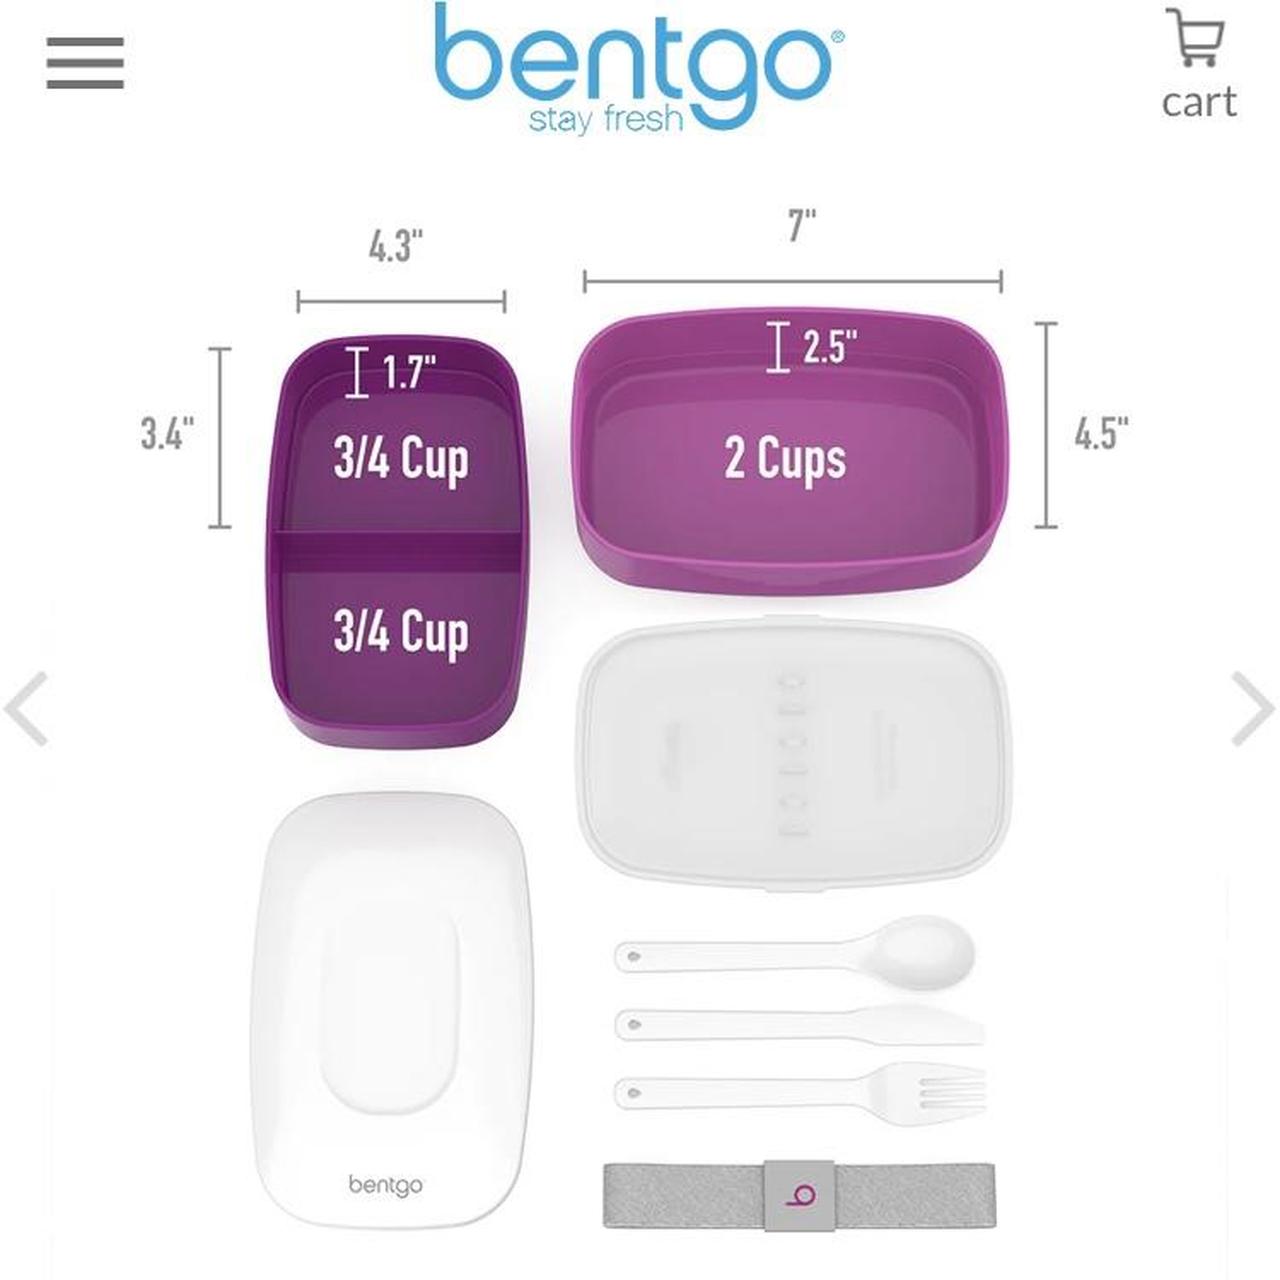 Bentgo Glass Salad Container All-In-One New in - Depop